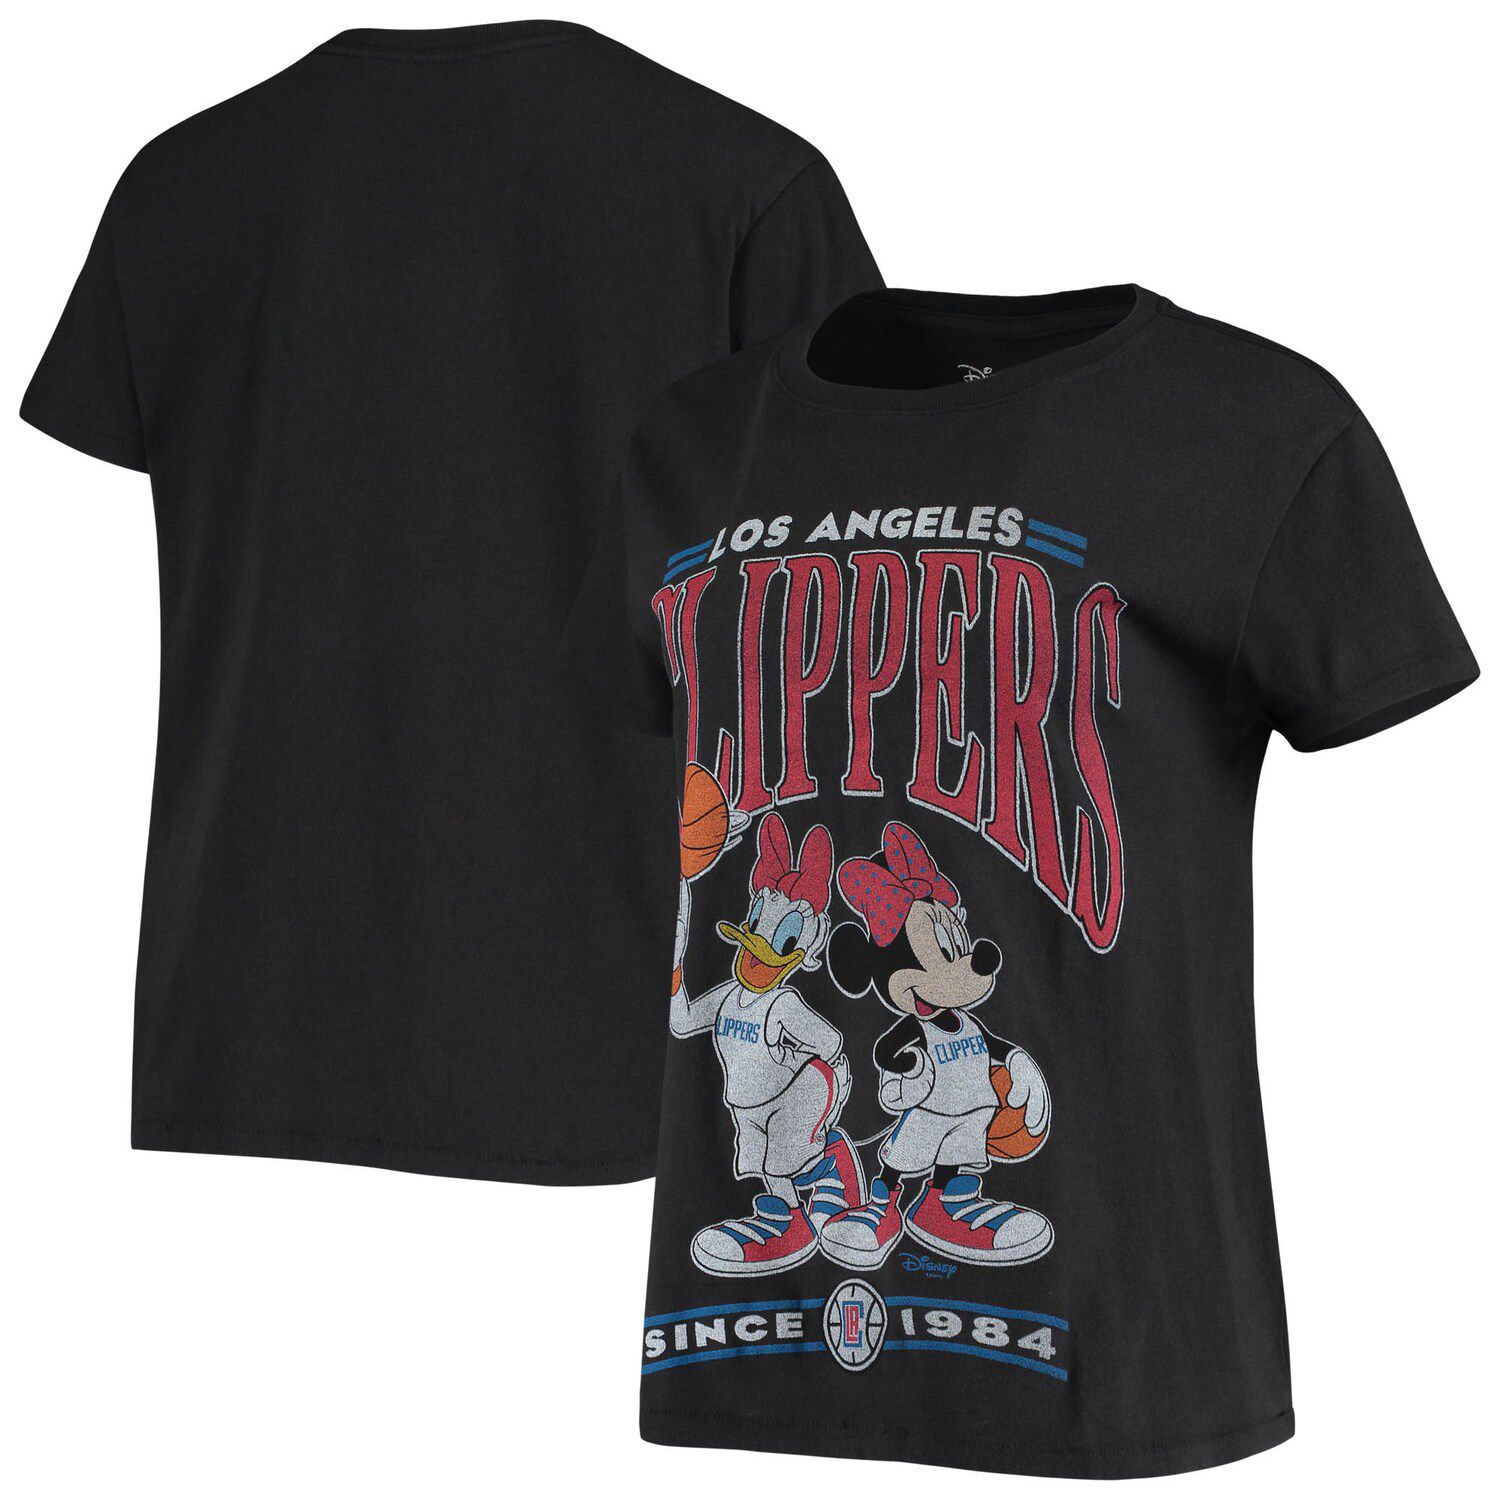 Image for Unbranded Women's Junk Food Black LA Clippers Minnie & Daisy T-Shirt at Kohl's.